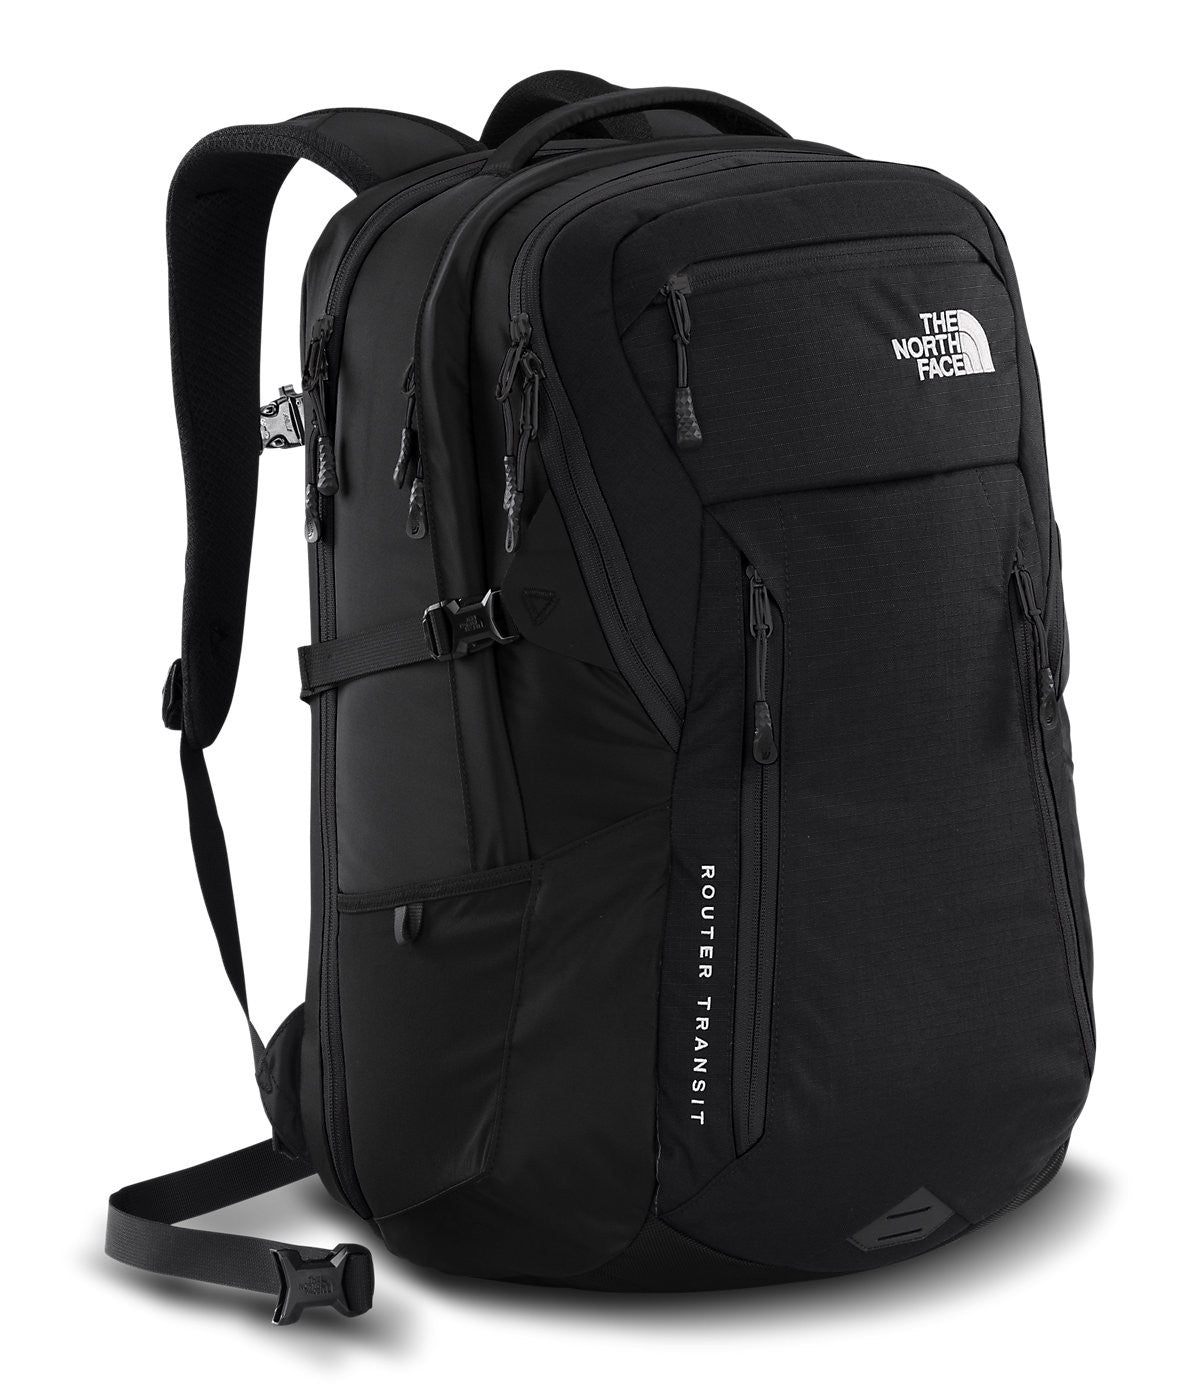 router transit backpack amazon